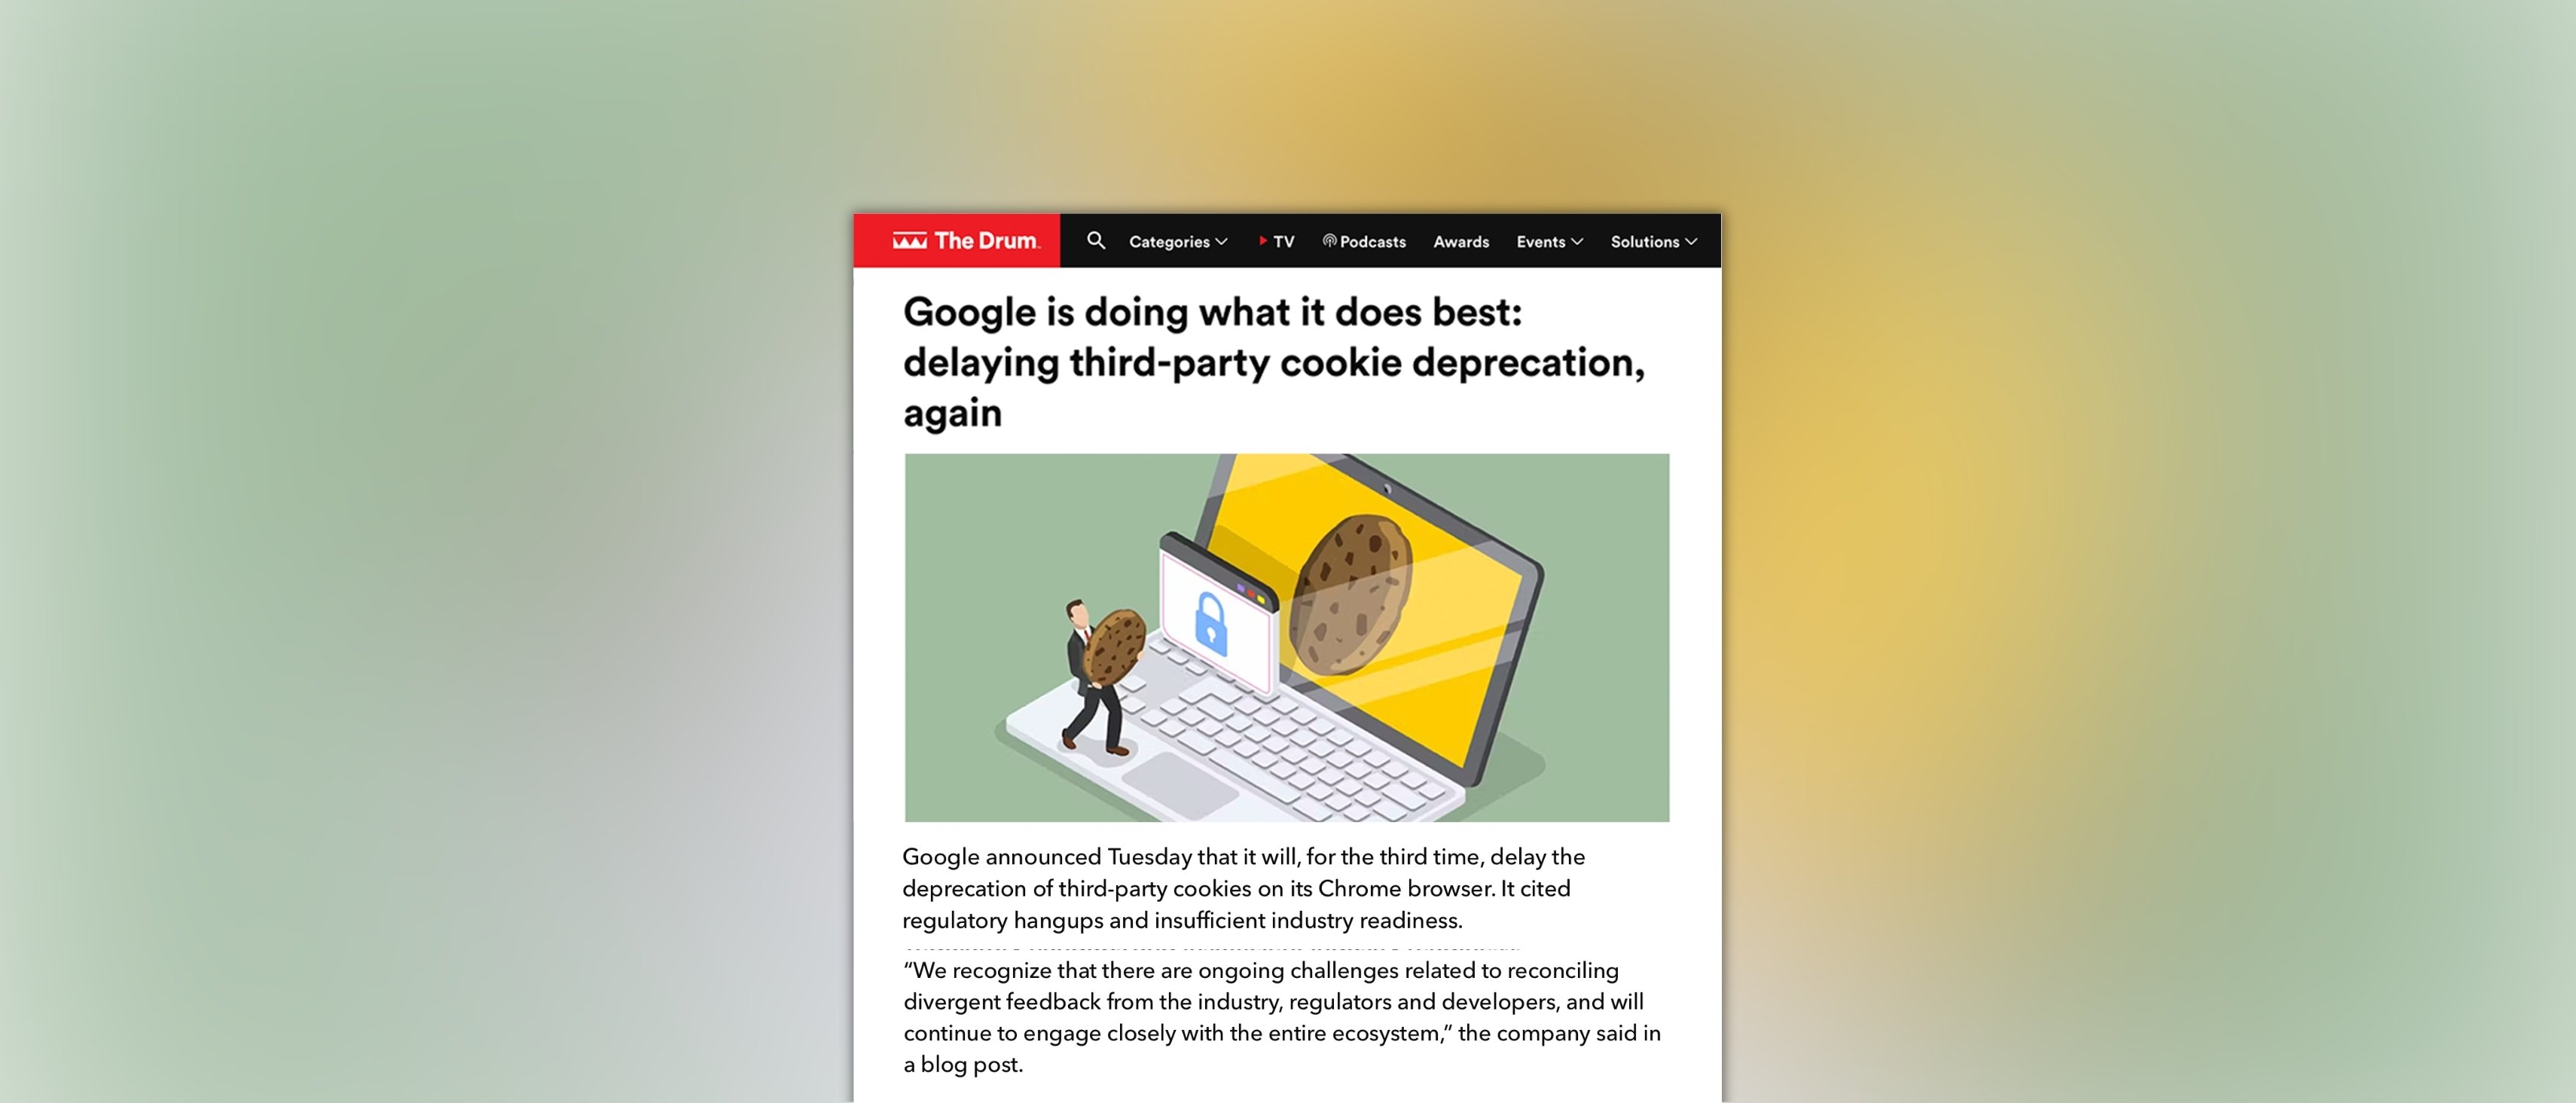 The Drum: Google is Doing What it Does Best: Delaying Third-Party Cookie Deprecation, Again